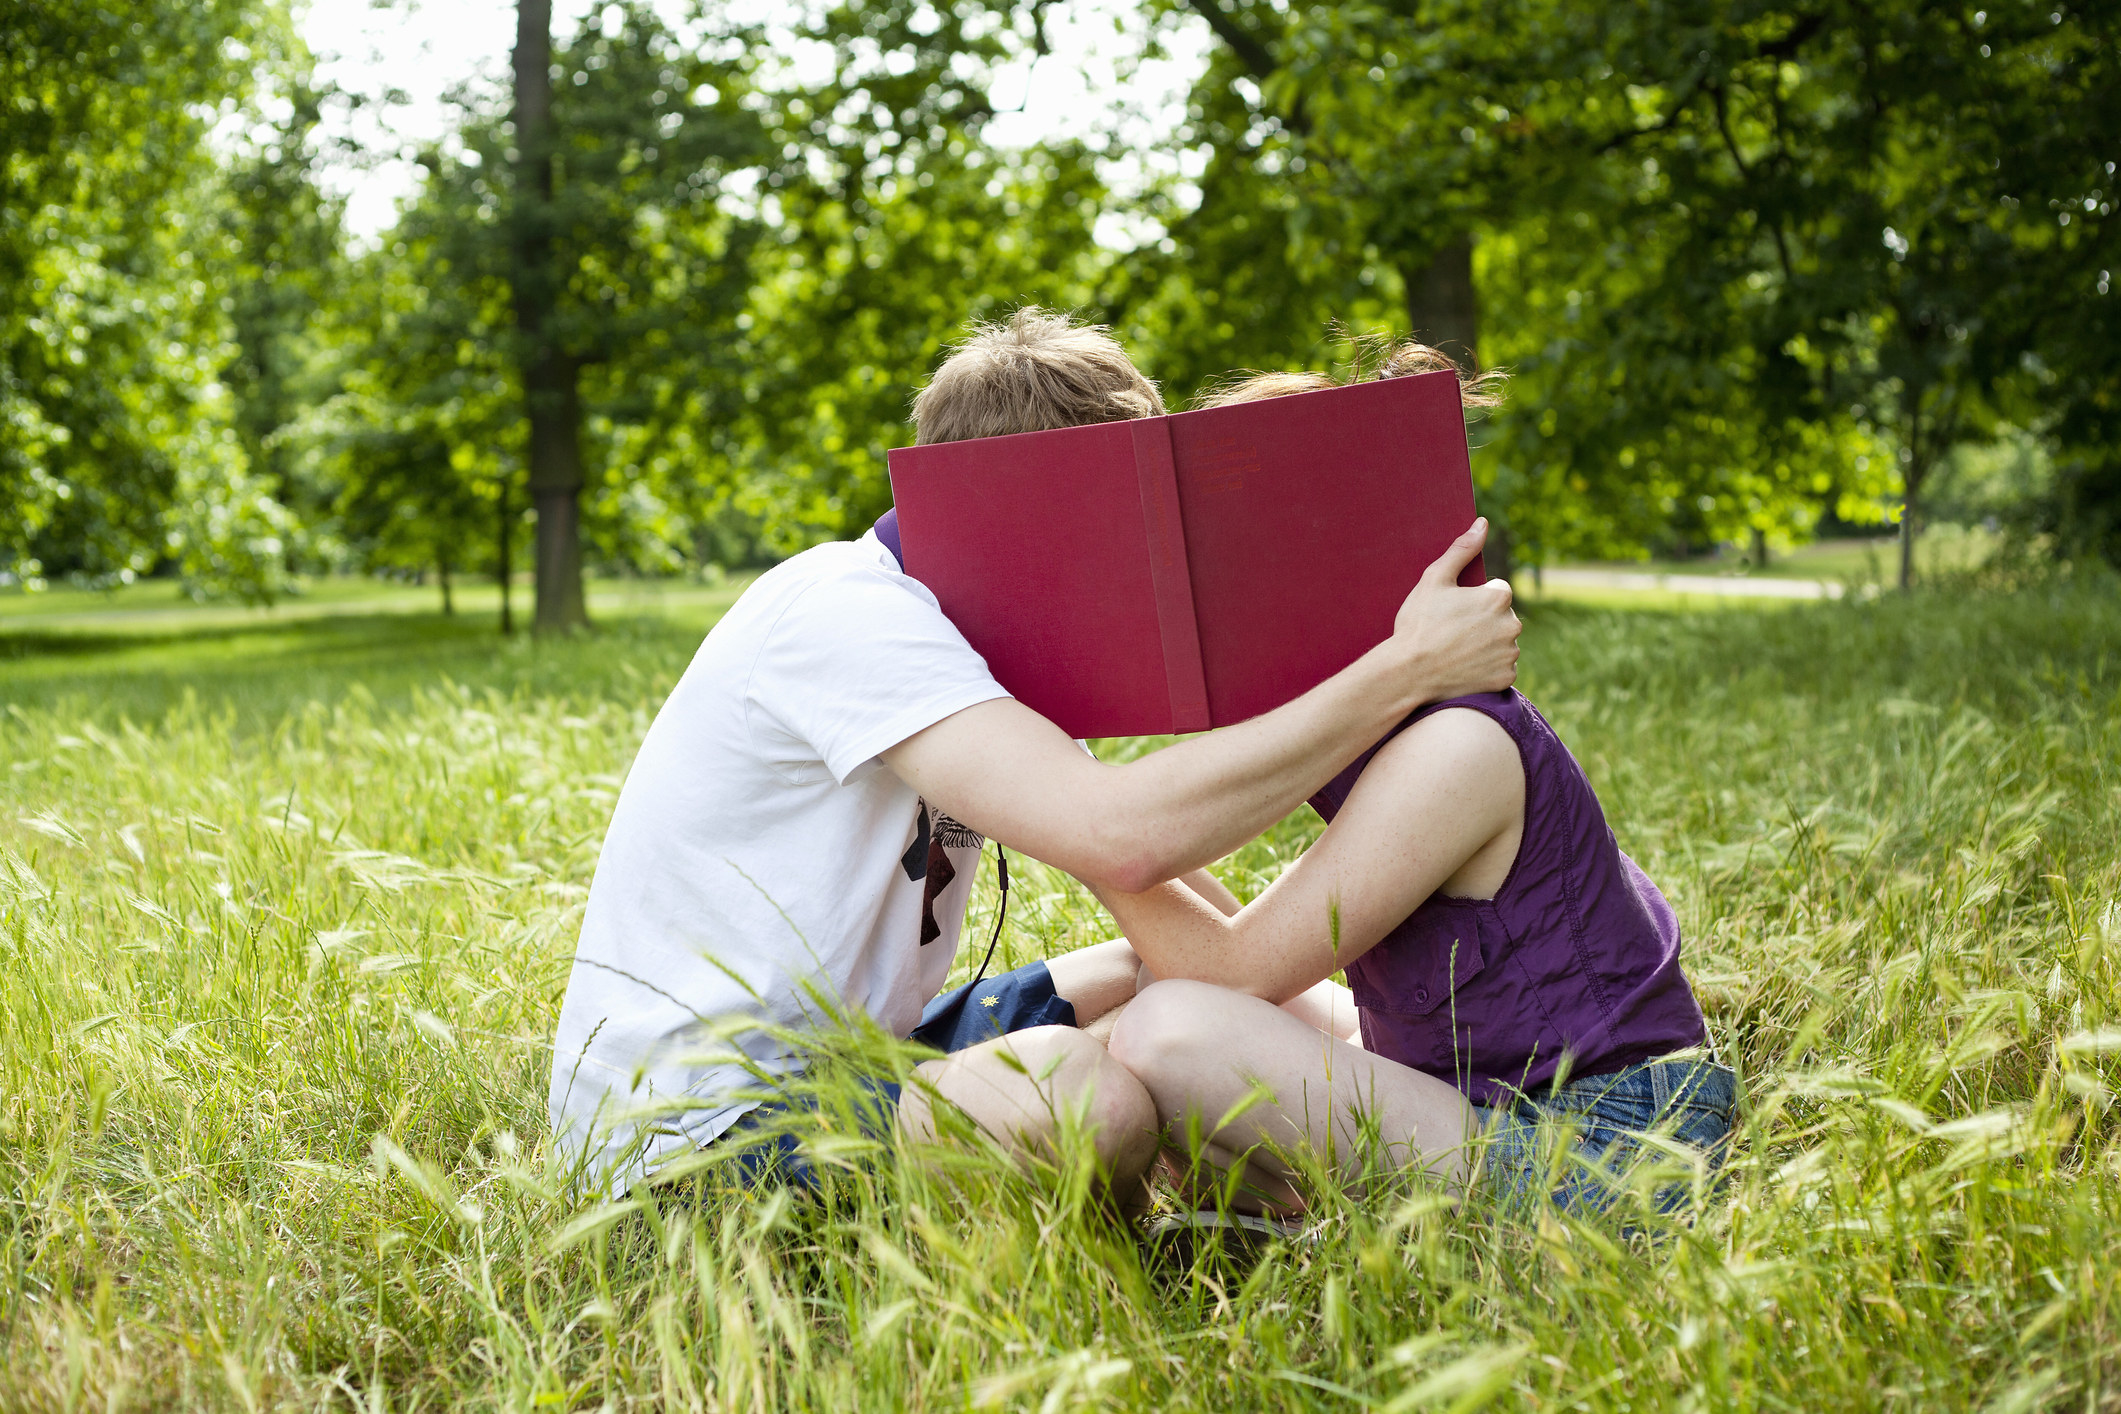 A couple seemingly kissing behind a book